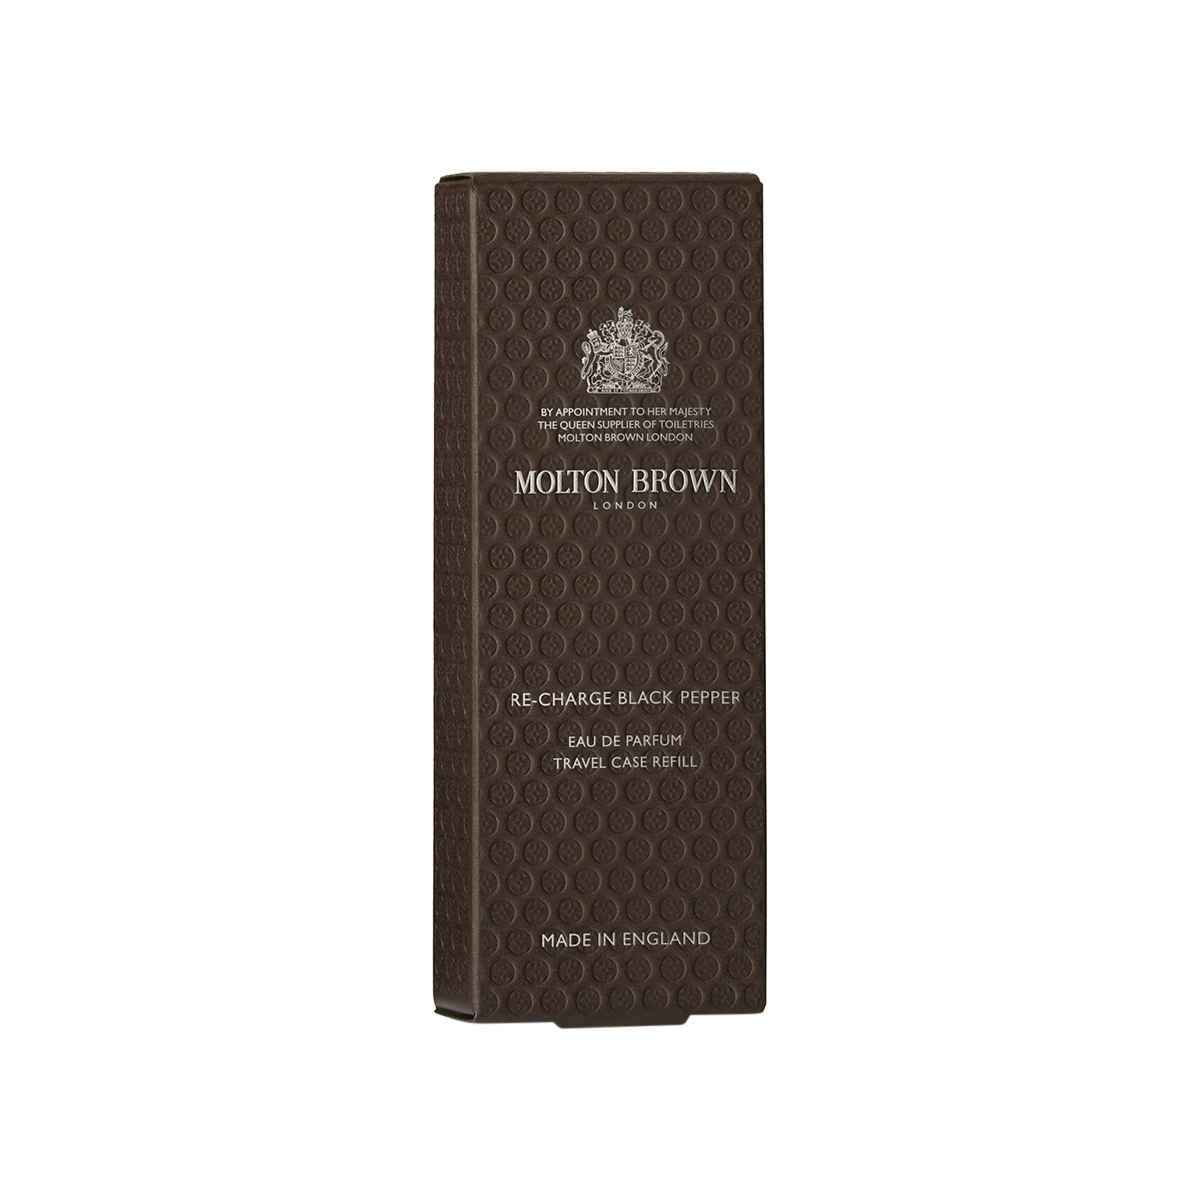 Molton Brown - Re-charge Black Pepper EDP Travel Refill